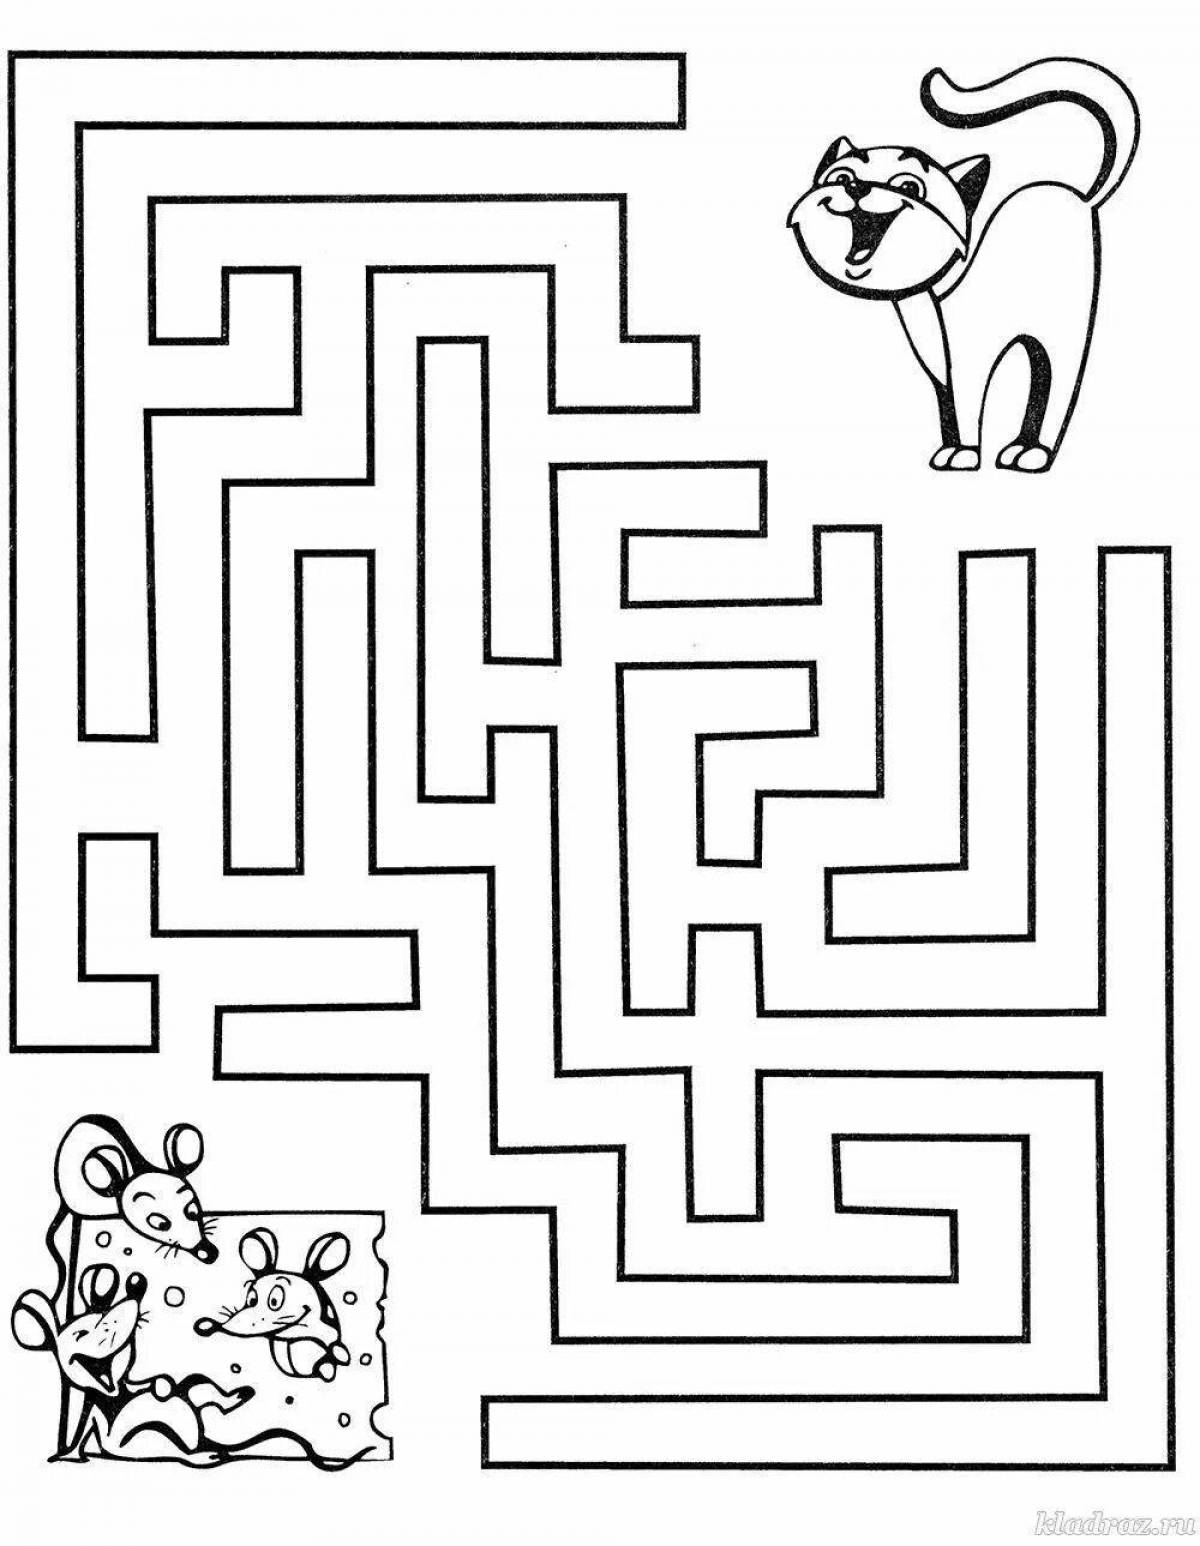 Educational maze coloring book for 4 year olds